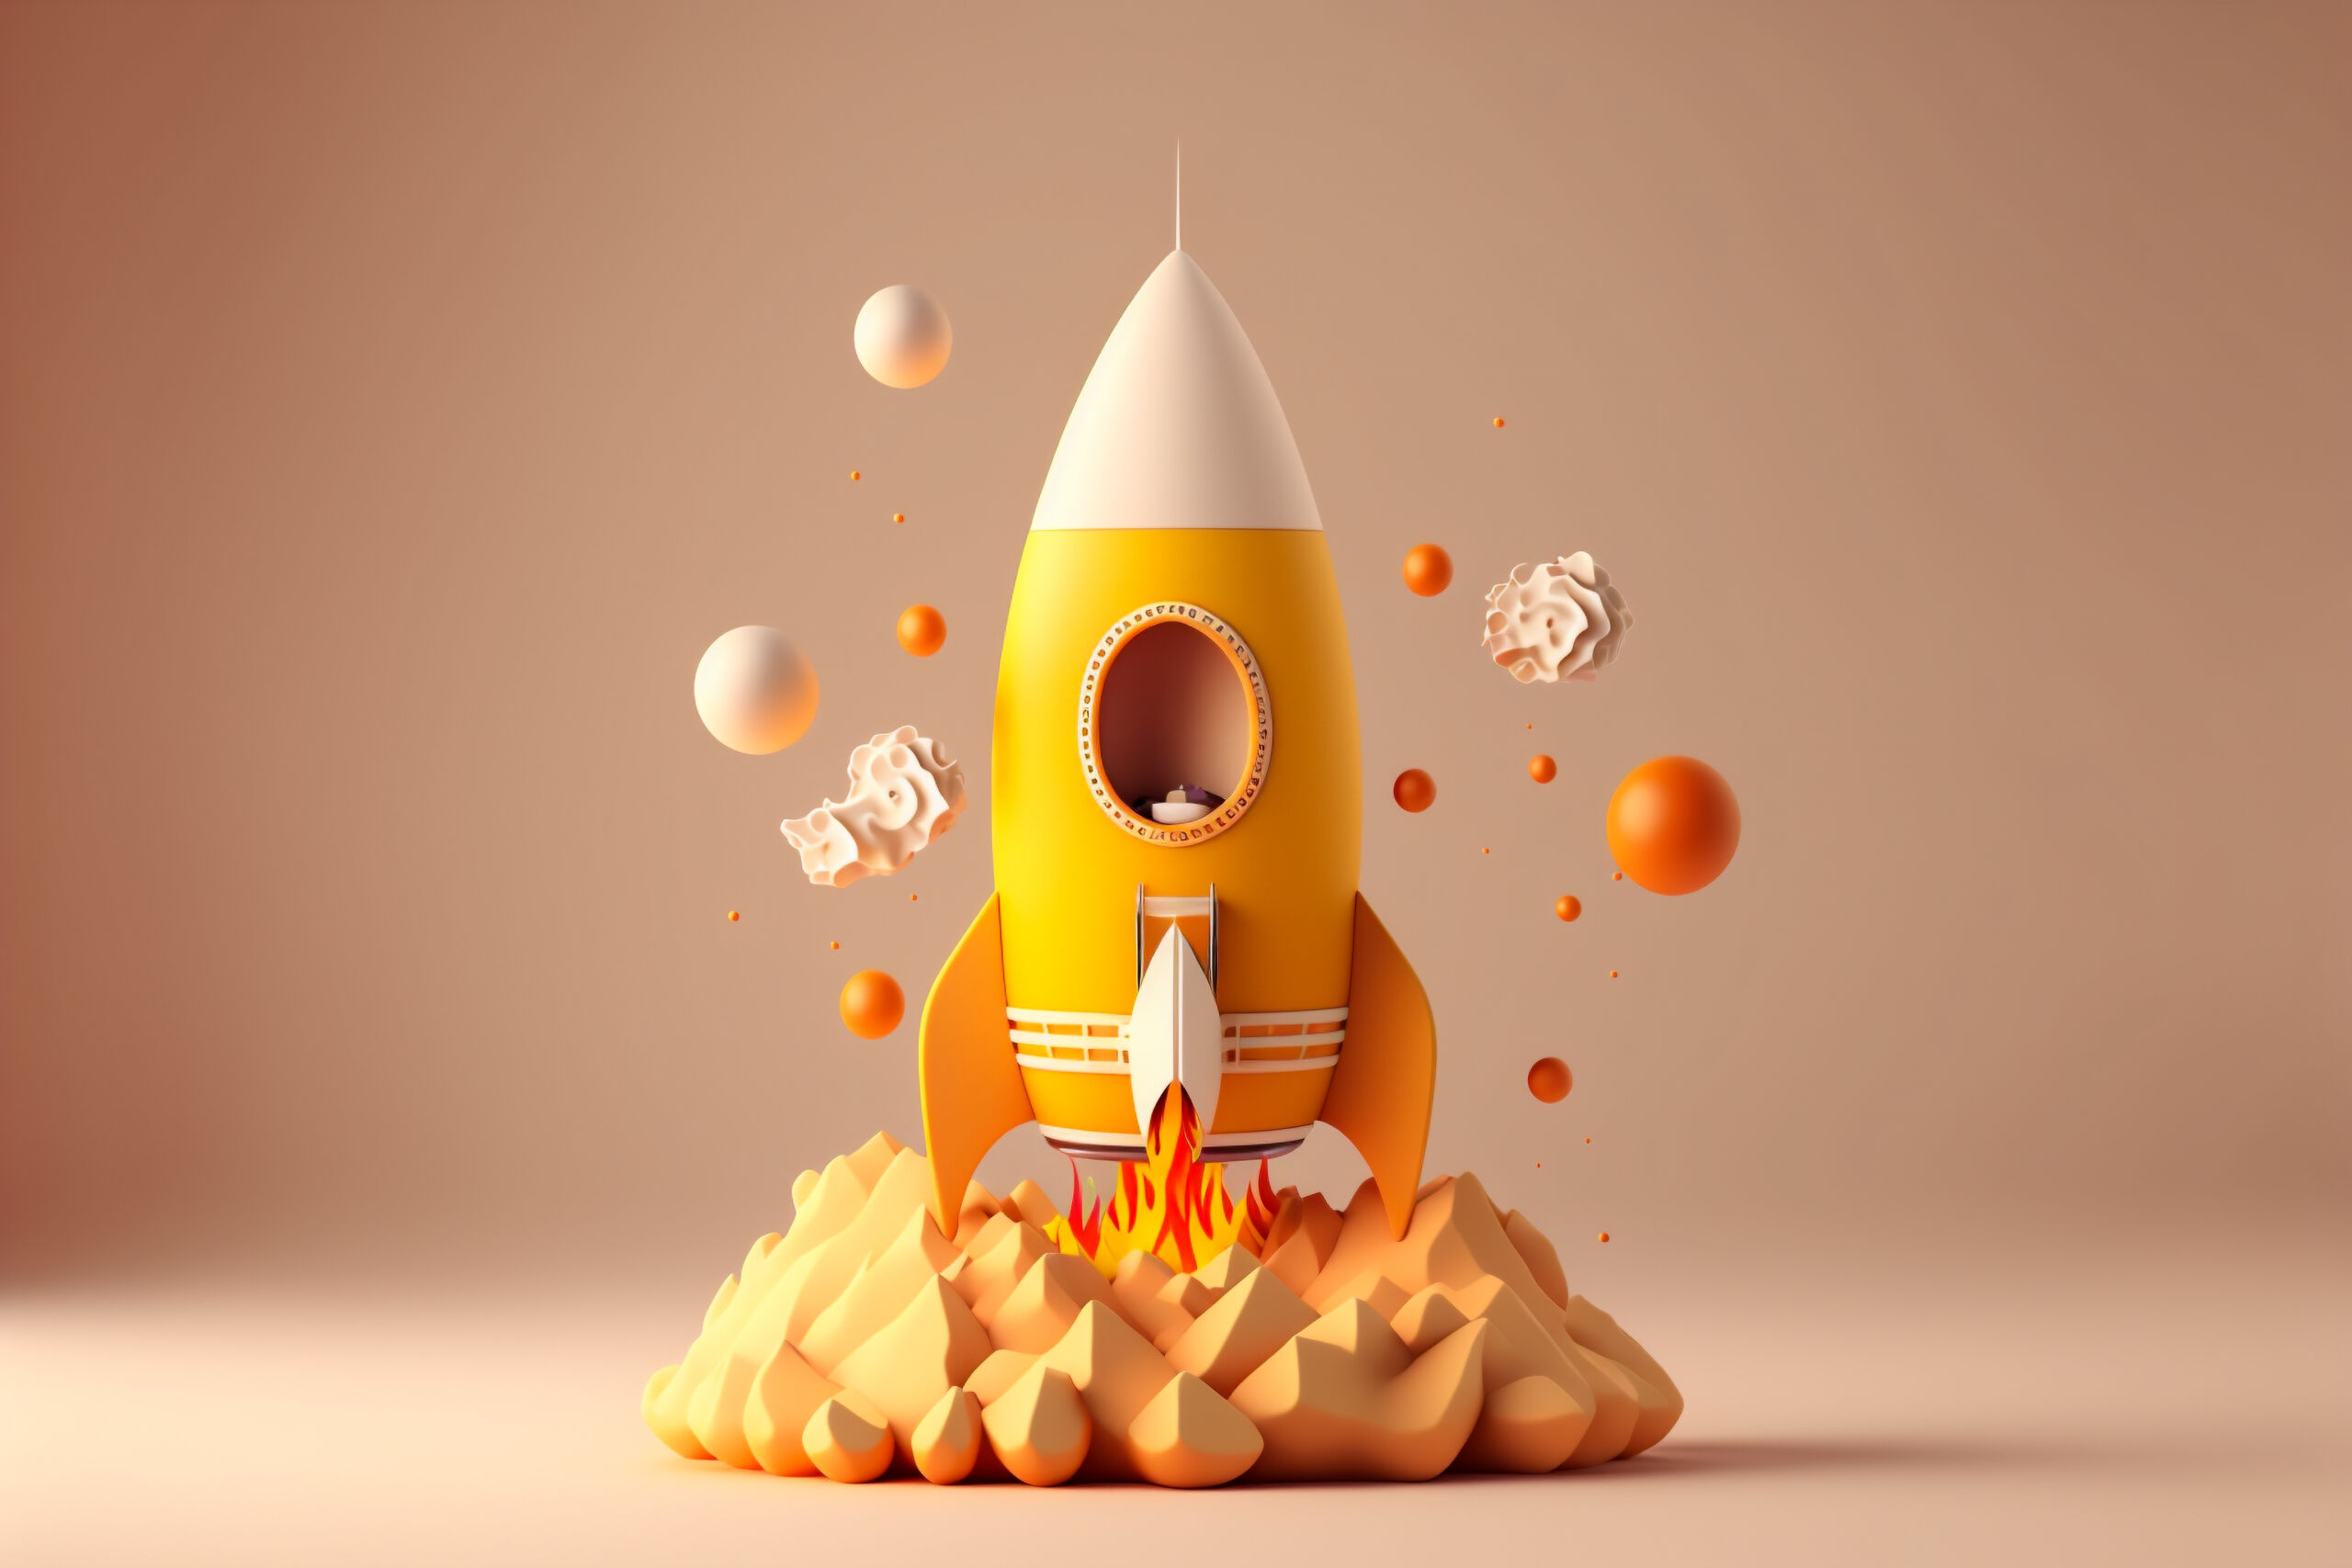 Abstract yellow rocket ship concept in cartoon style.